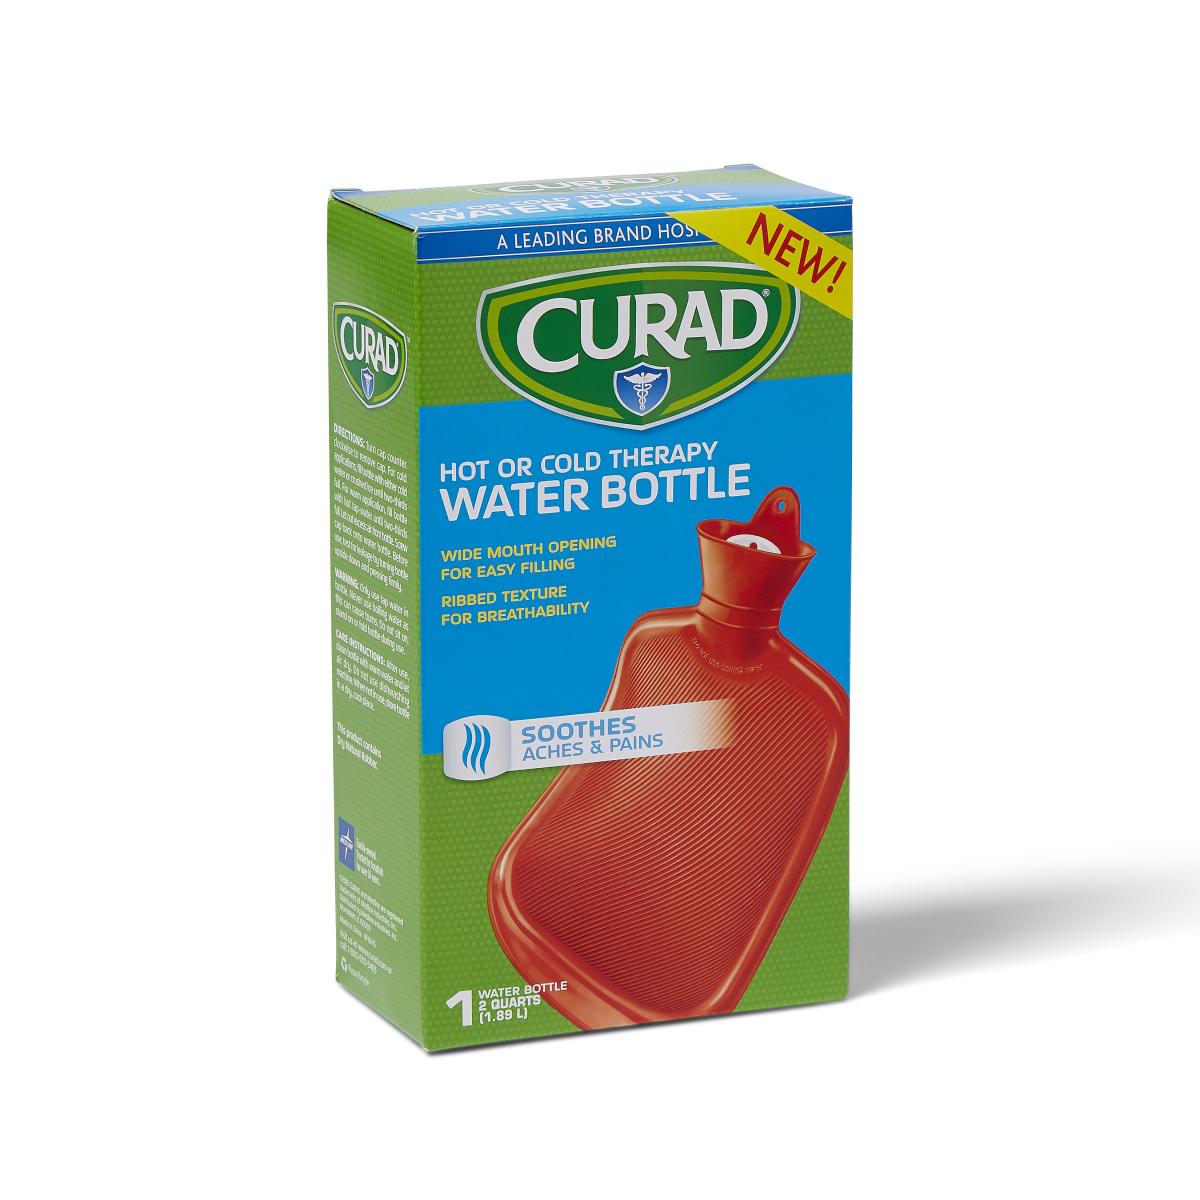 CURAD Hot or Cold Therapy Water Bottle,Red Box of 1